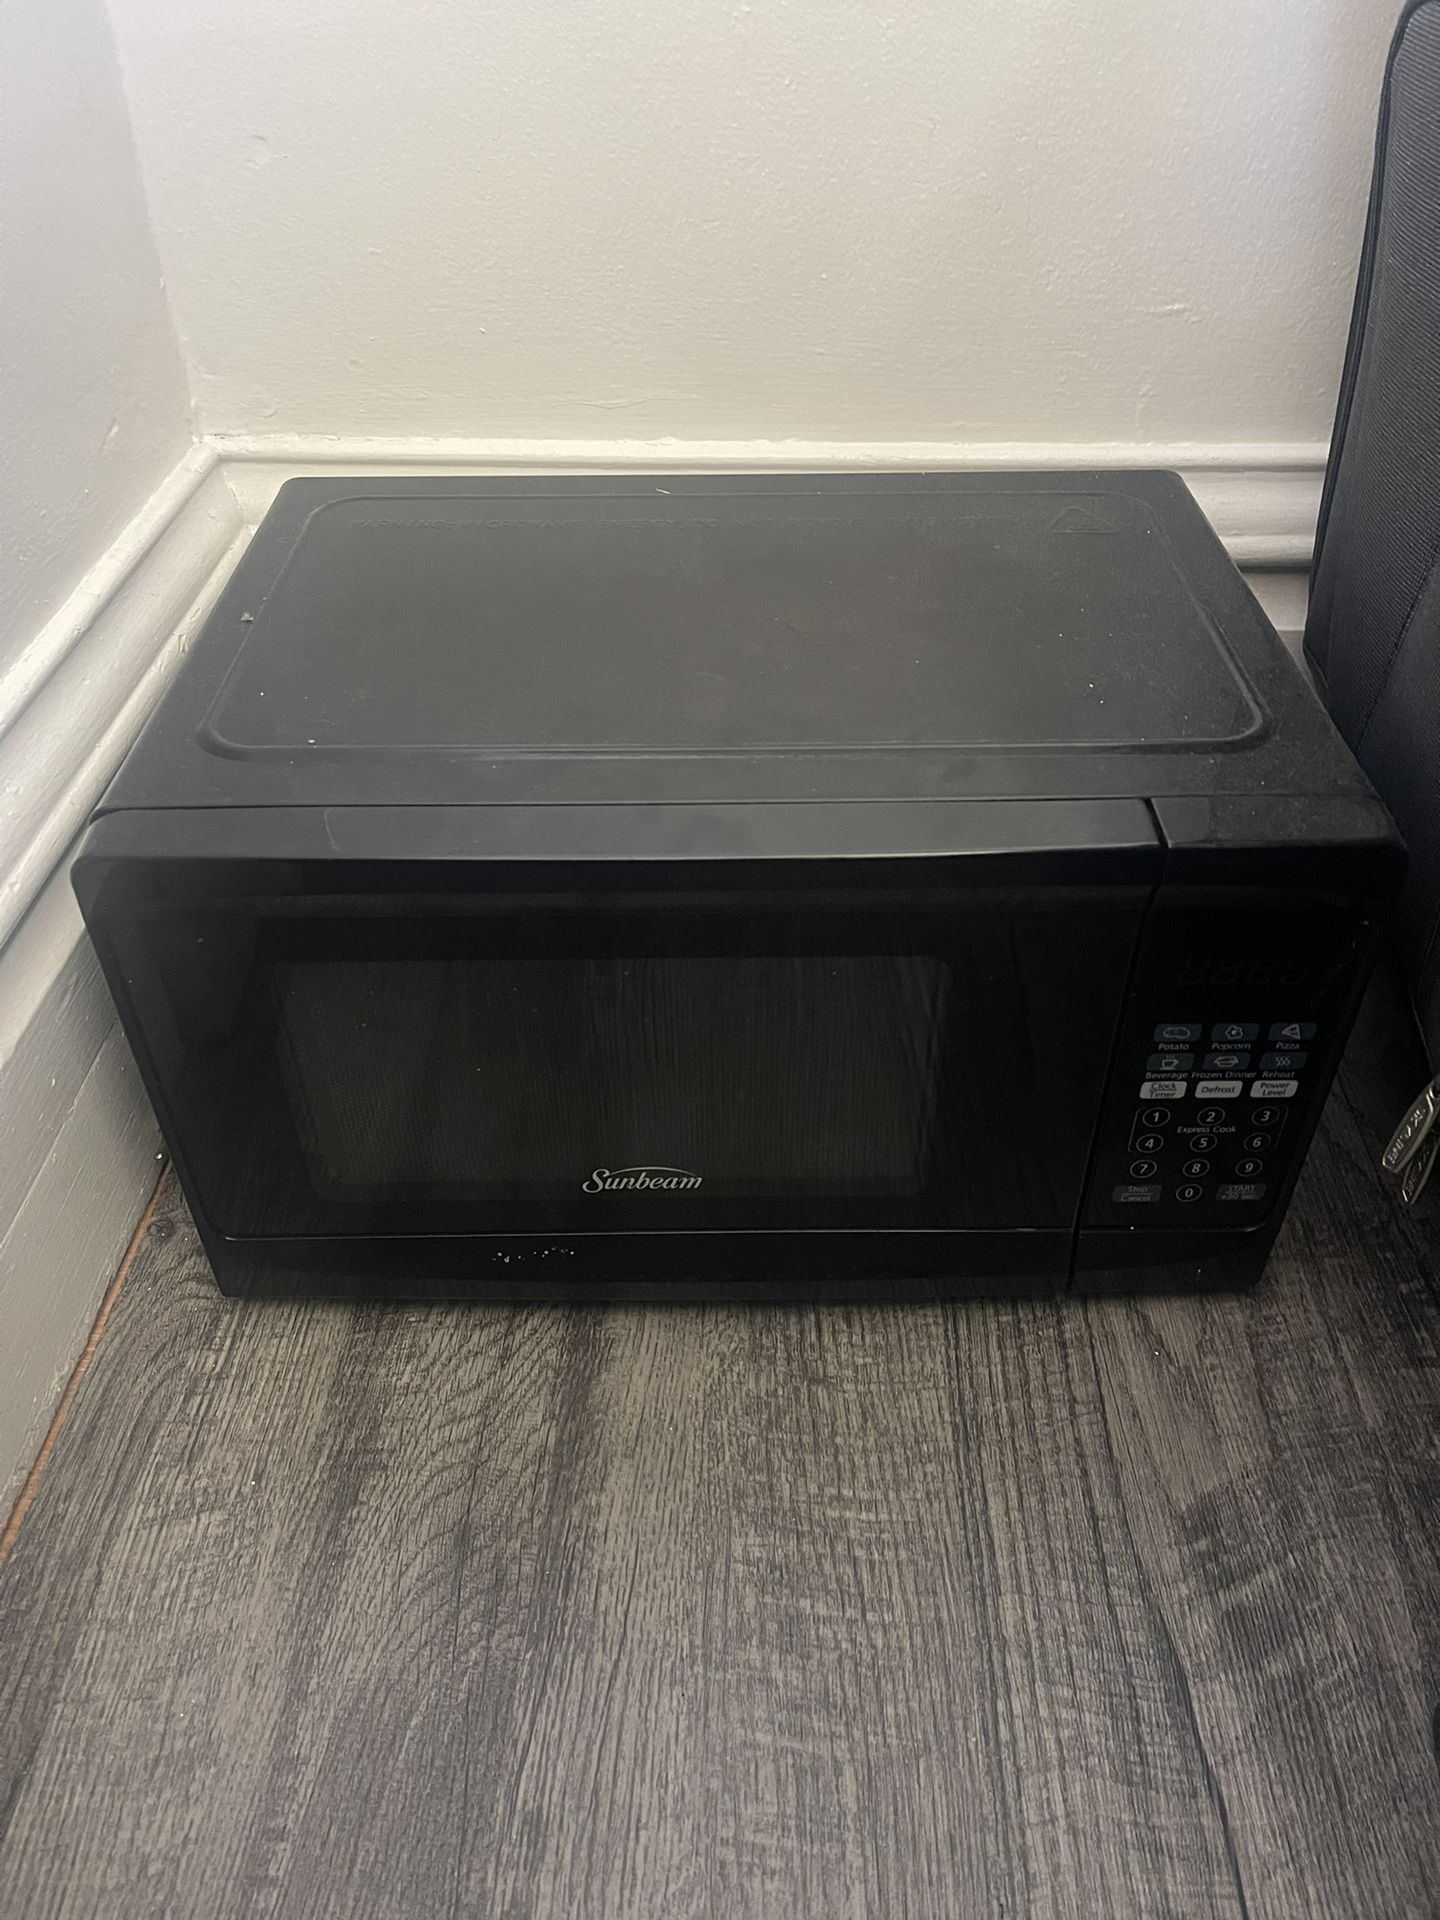 MICROWAVE FOR $20!!!